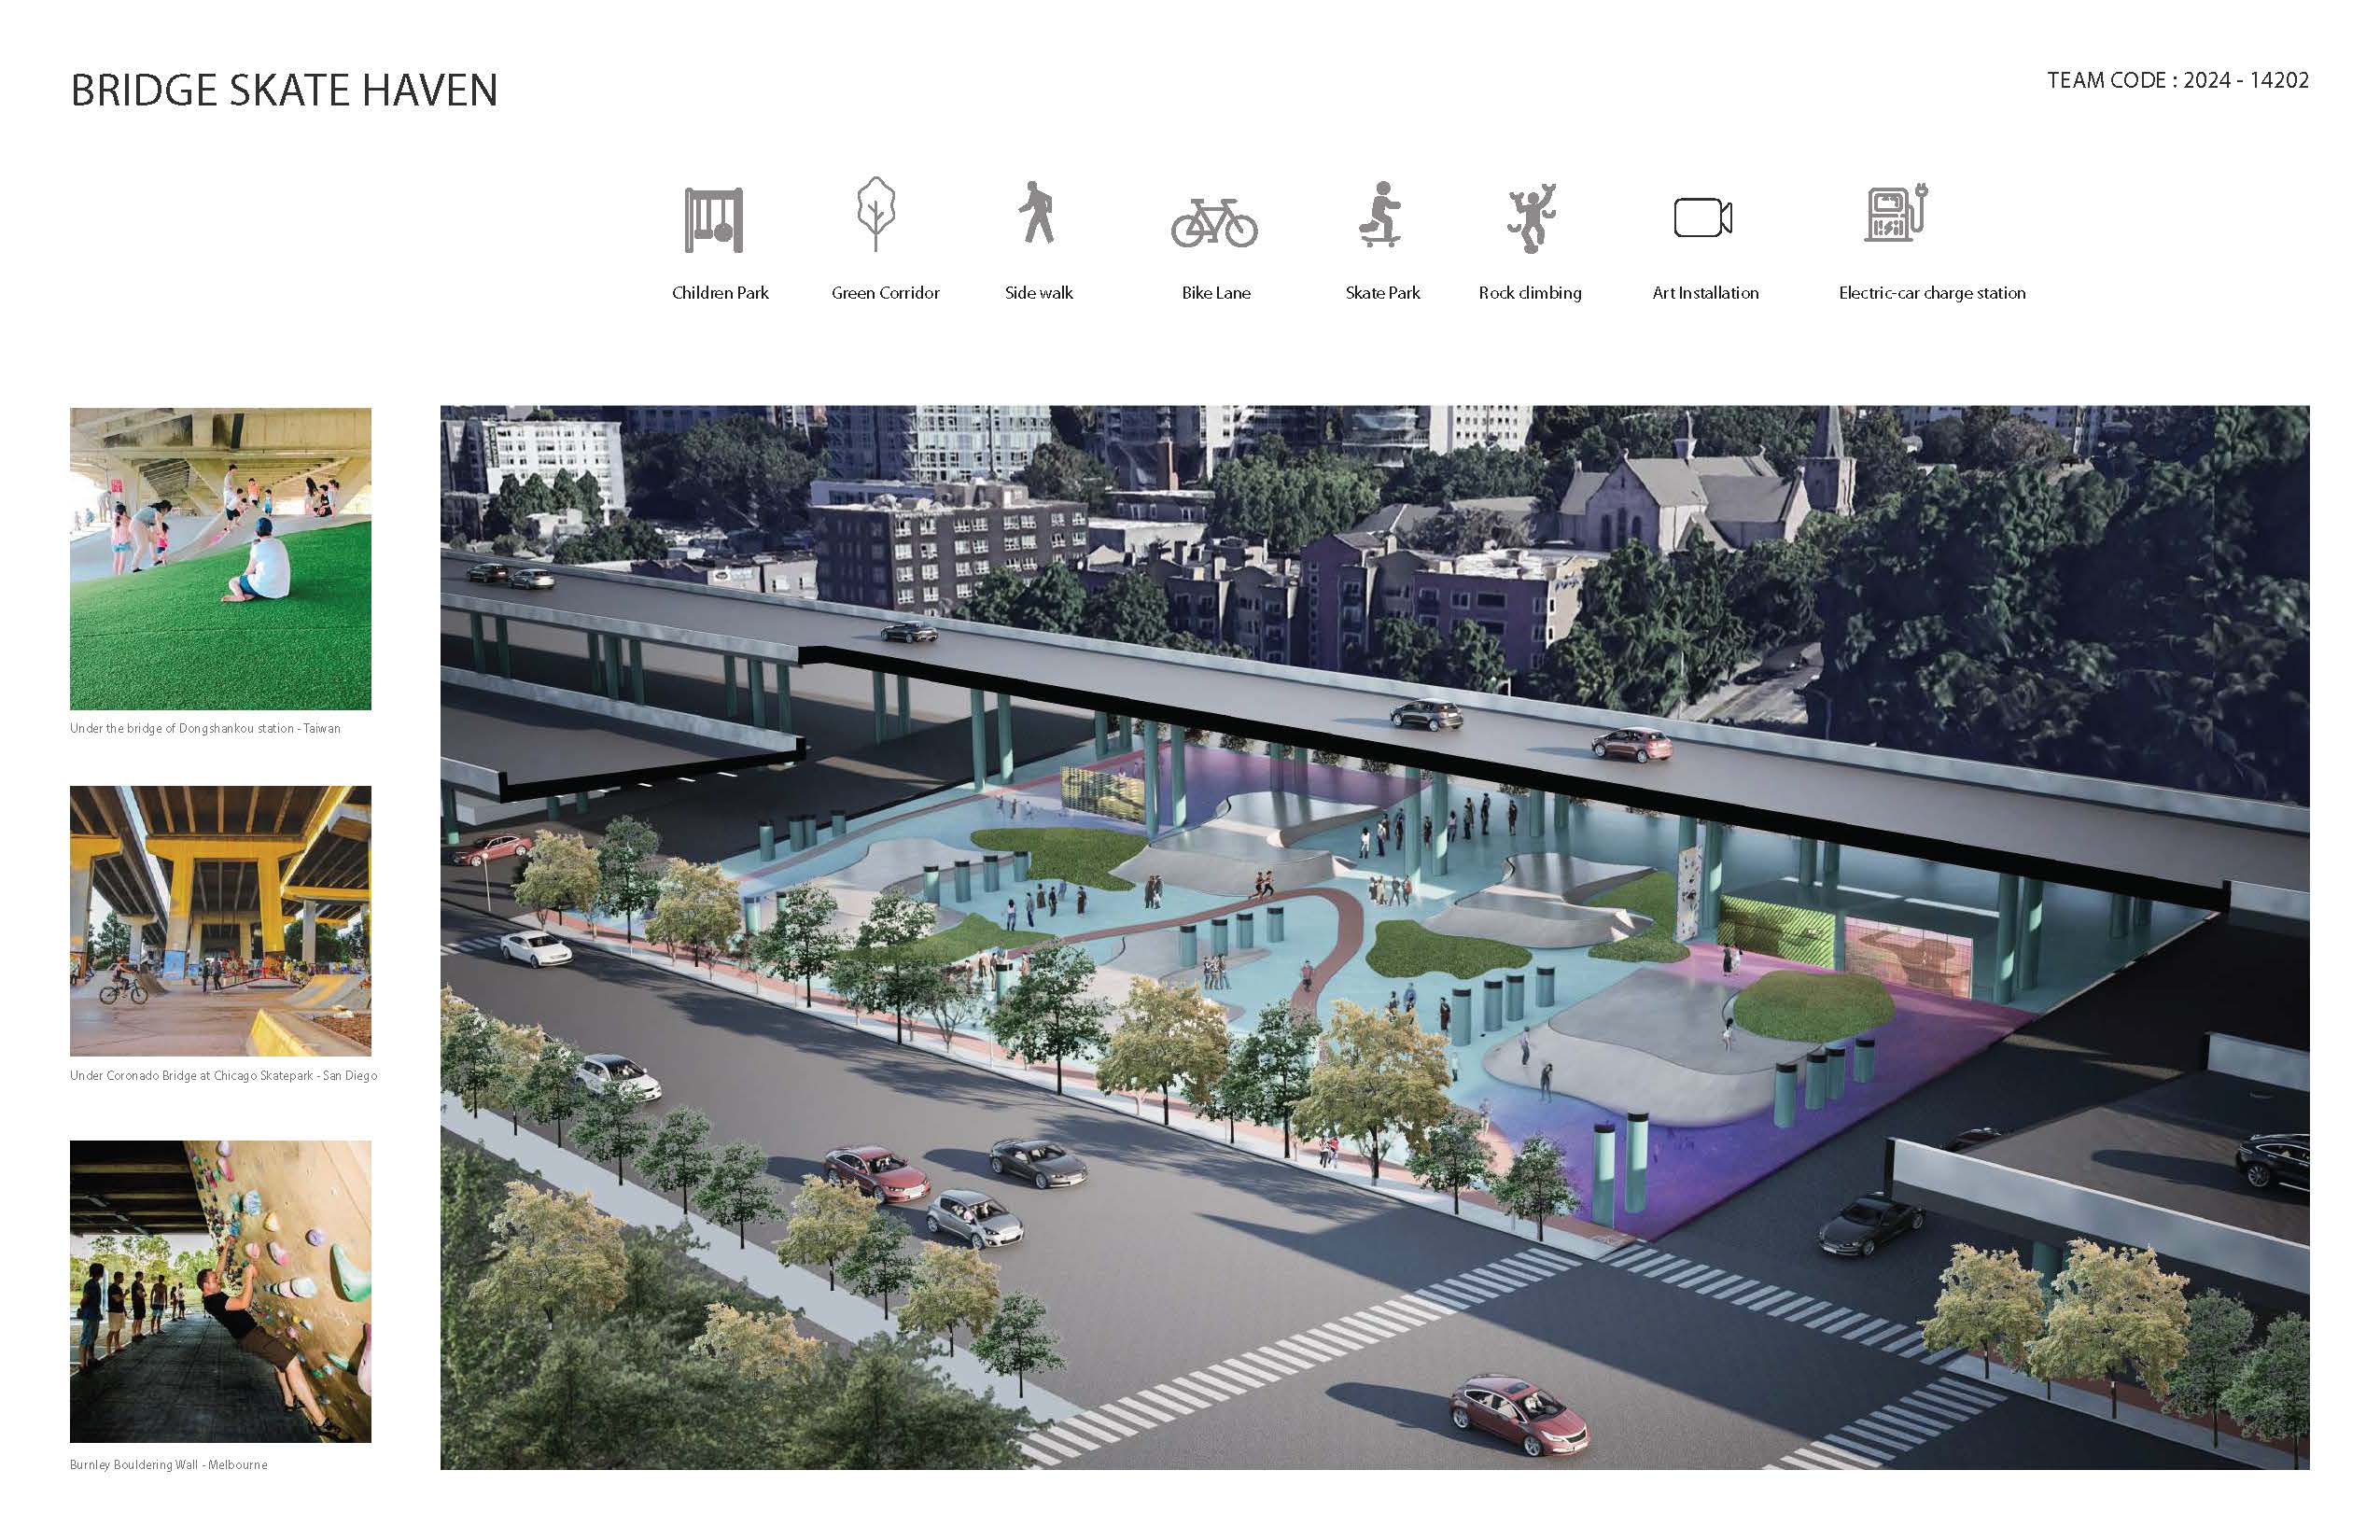 Rendering and elements proposed for The Stitch's "Bridge Skate Haven."